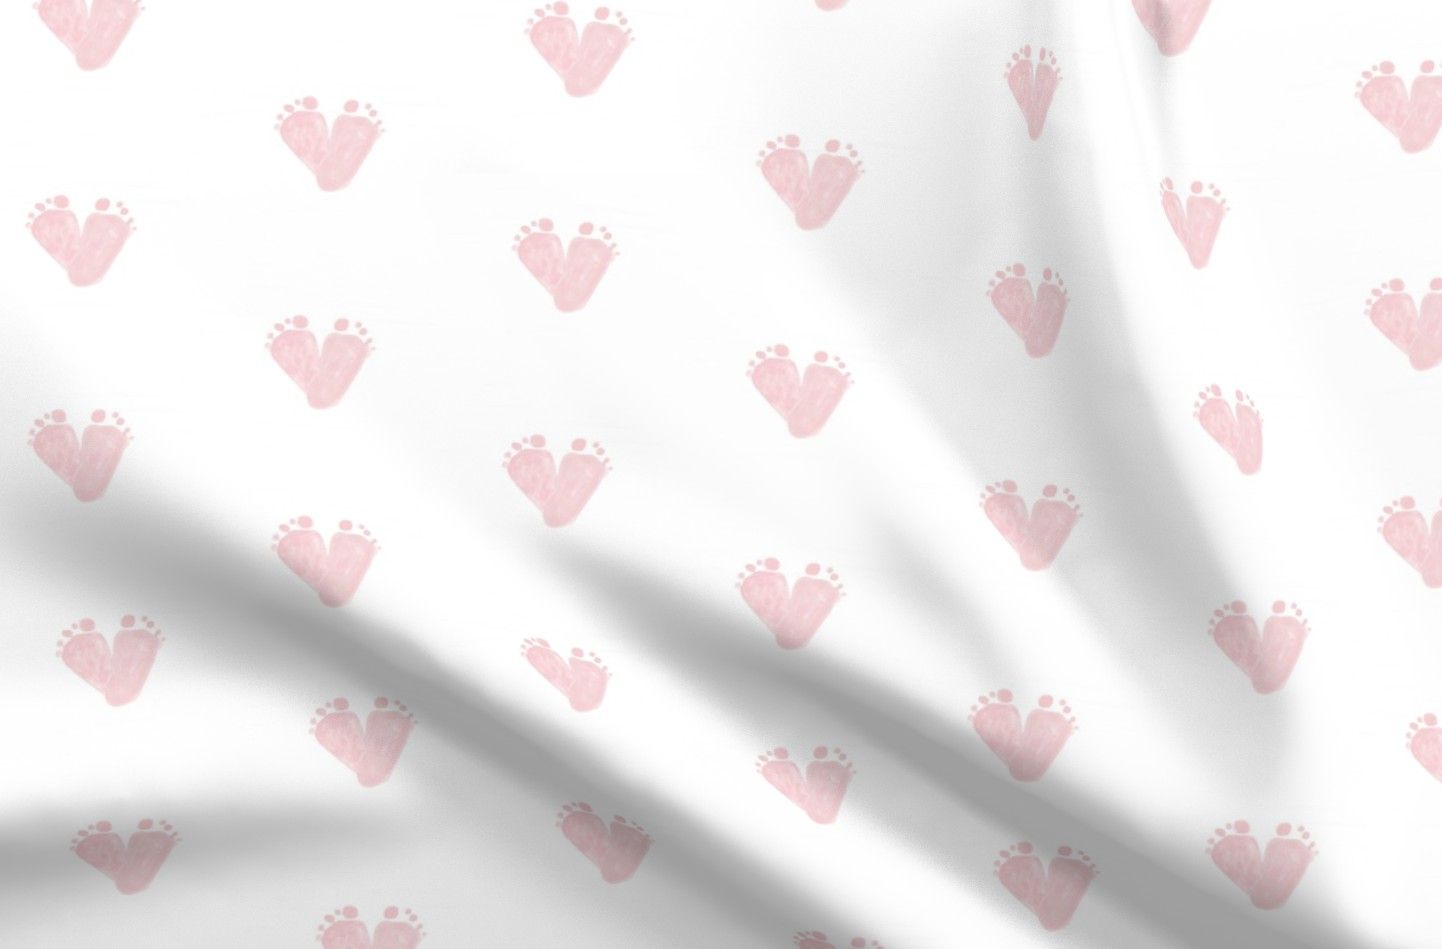 Baby Love Minky Fabric By the Yard Hearts Pink Baby Footprints By Spoonflower | Spoonflower